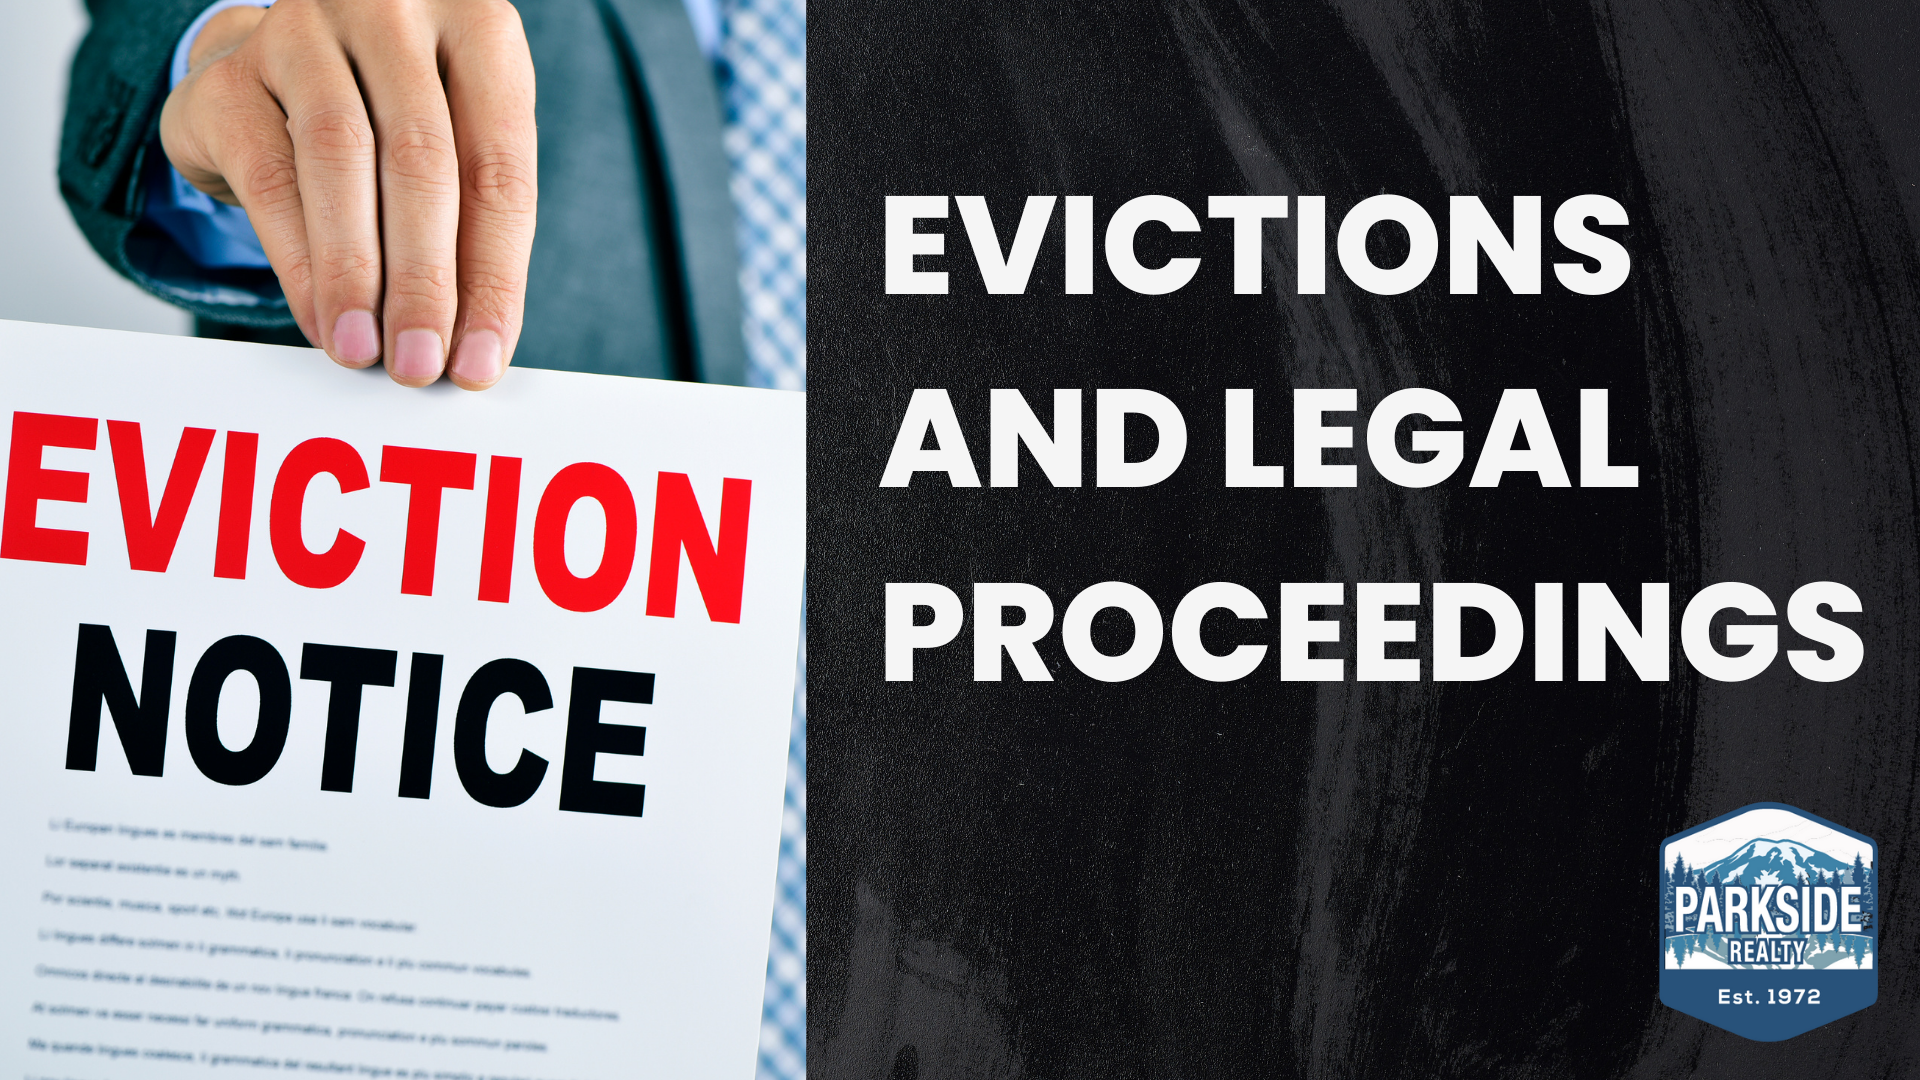 Evictions and Legal Proceedings